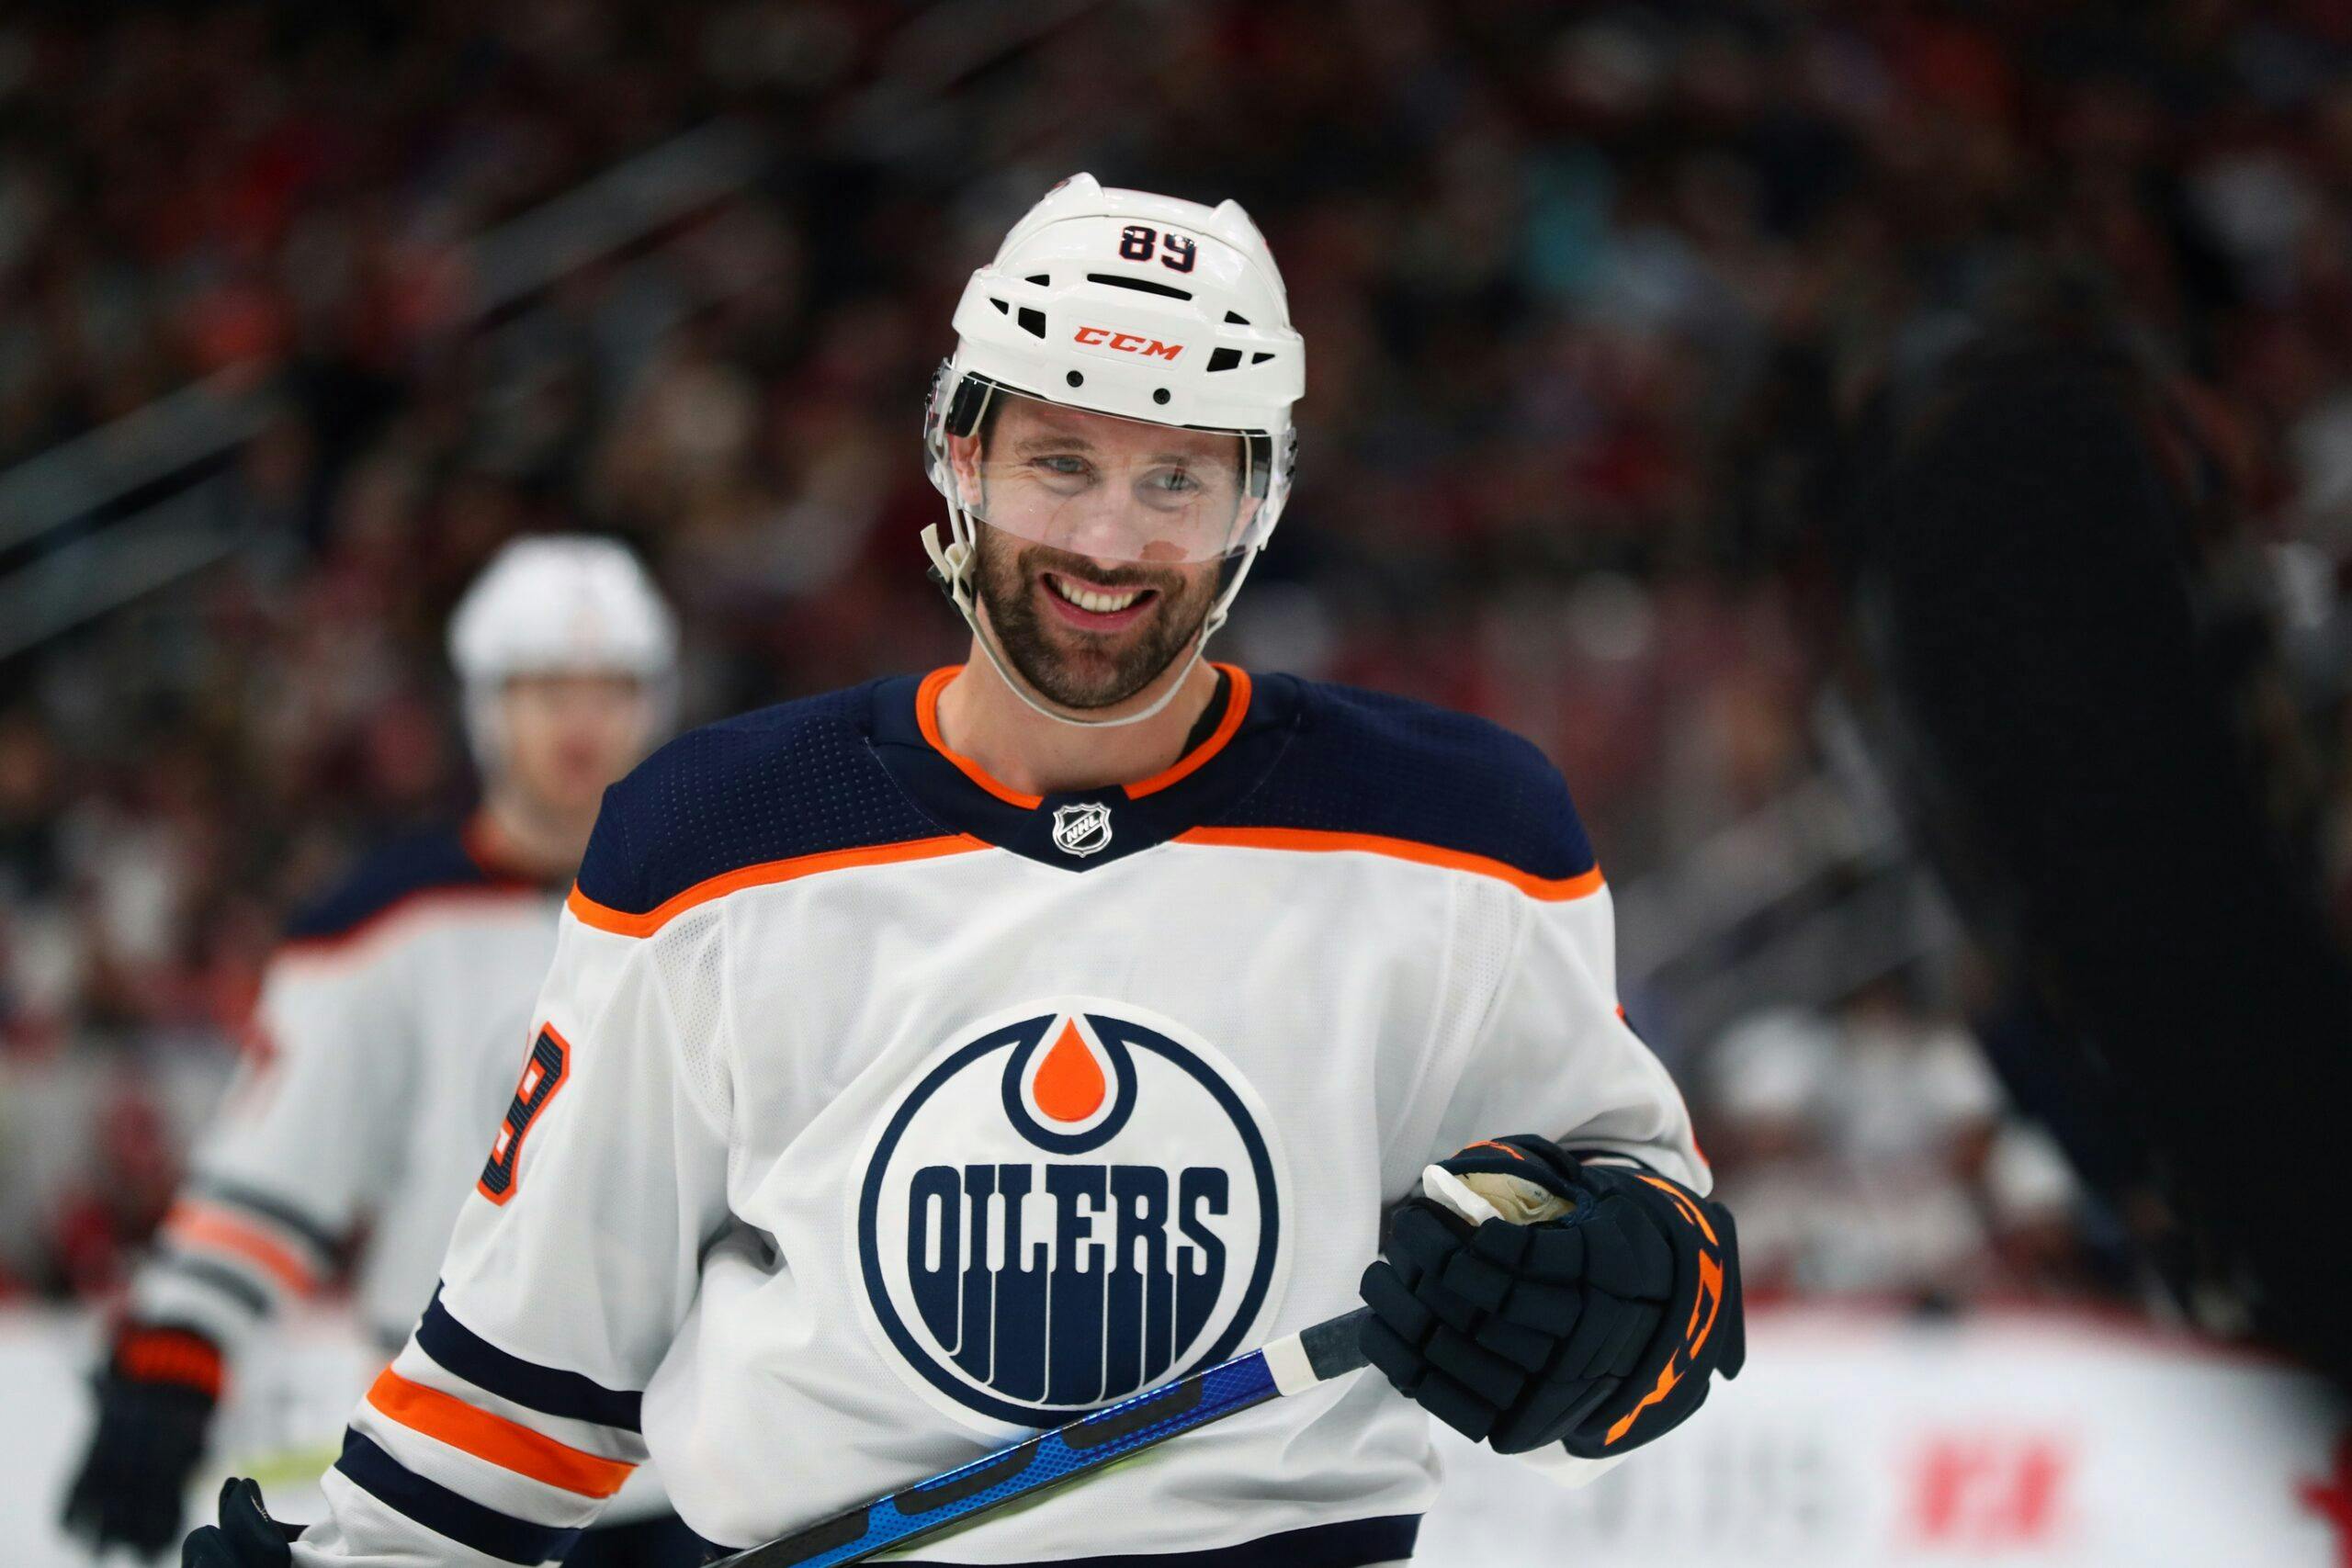 Sam Gagner Talks About PTOs and Coming Back to Edmonton 